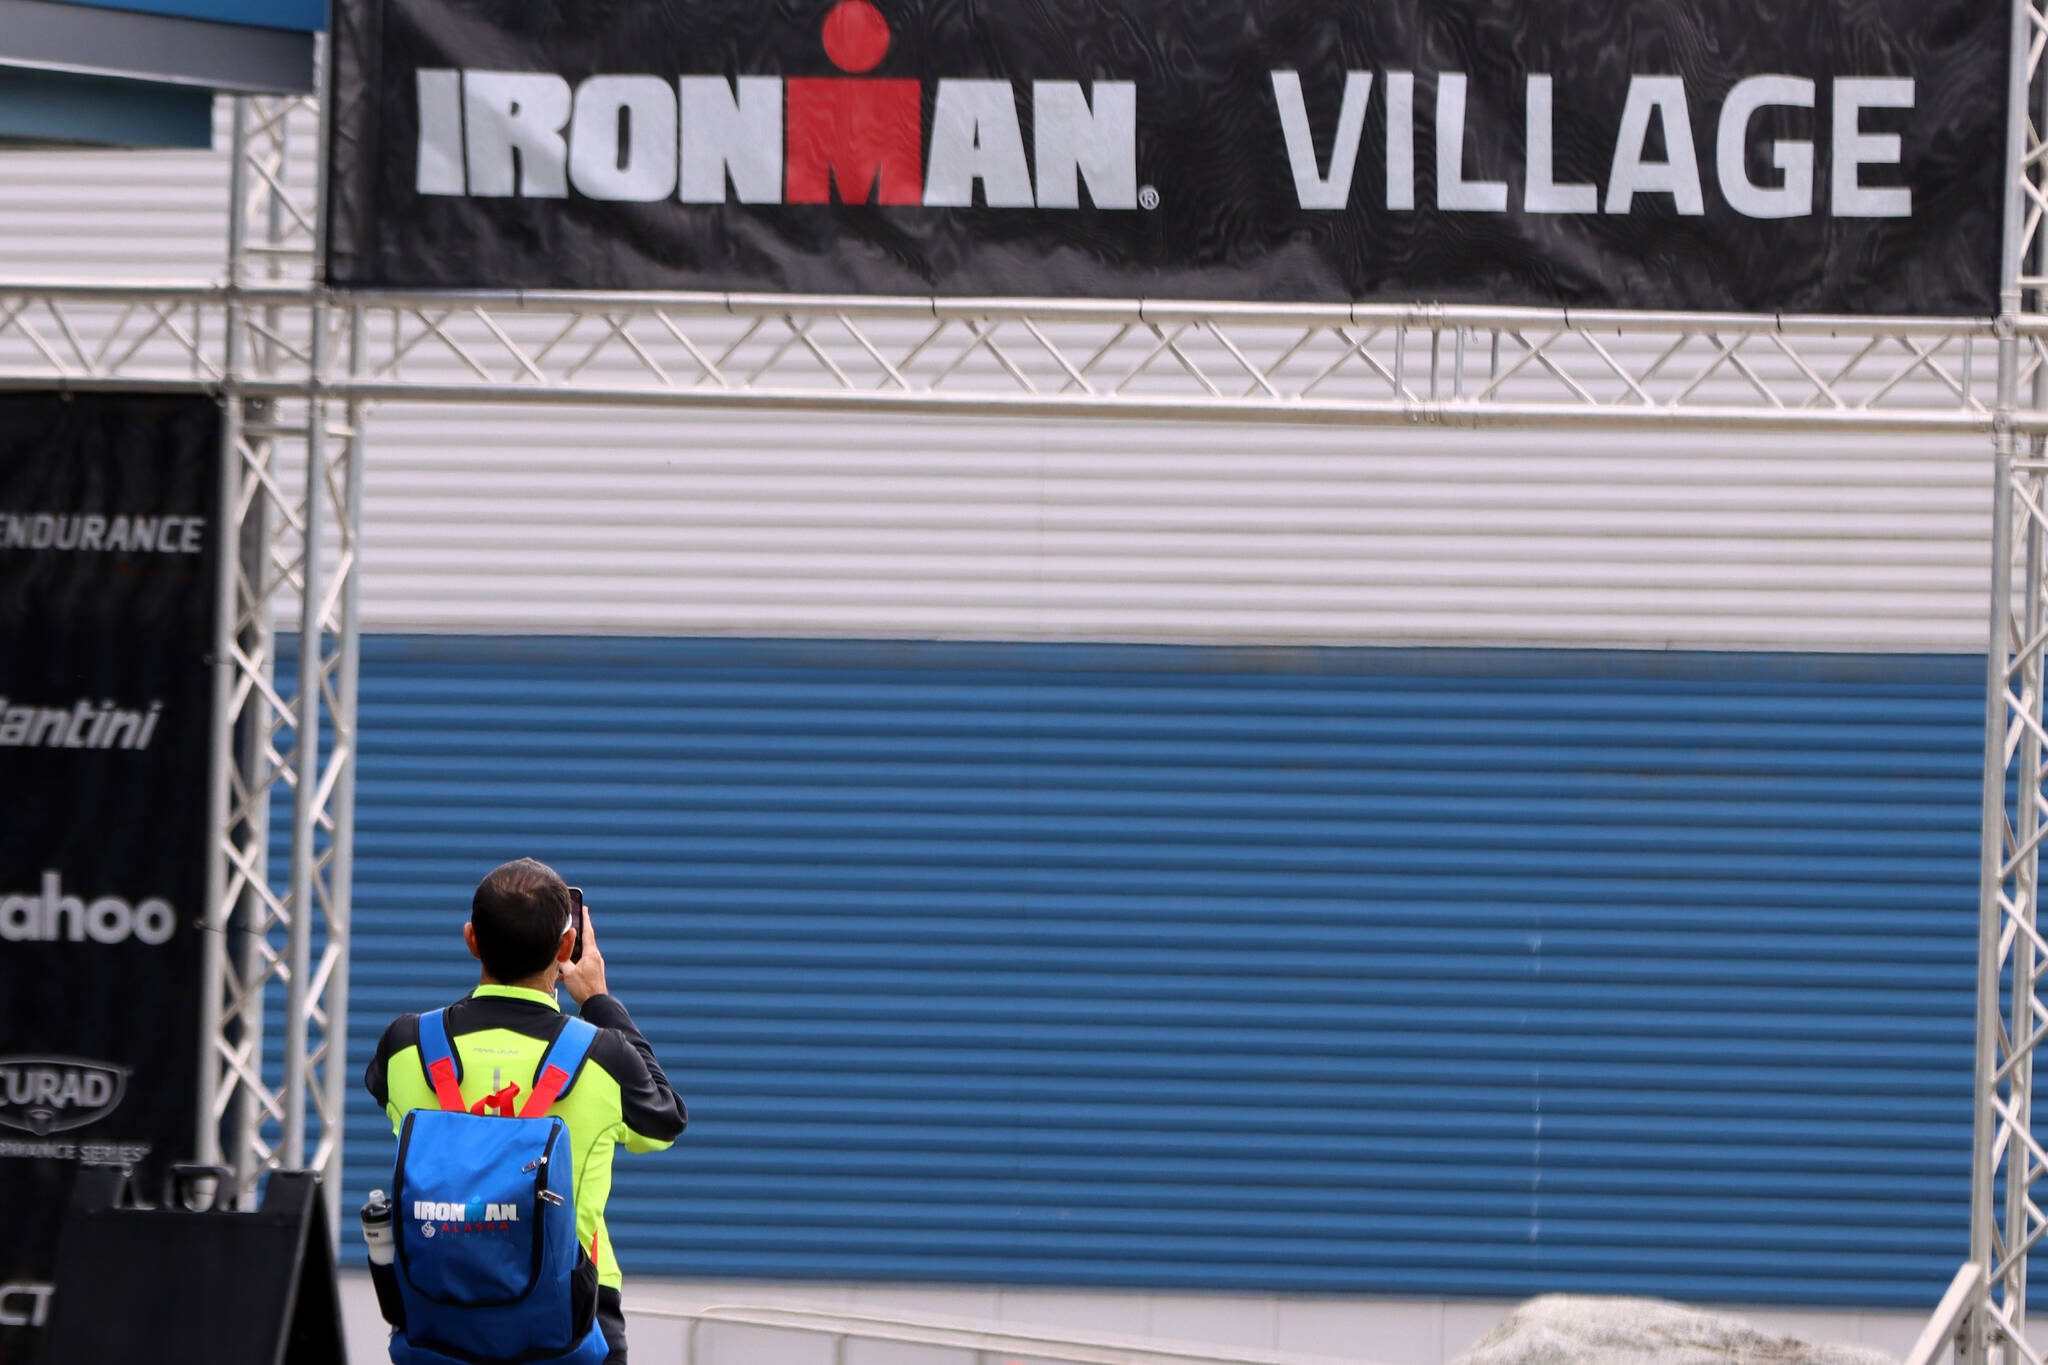 An athlete takes a photo of the Ironman Village sign placed at the entrance of Thunder Mountain High School on Thursday afternoon. (Ben Hohenstatt / Juneau Empire)